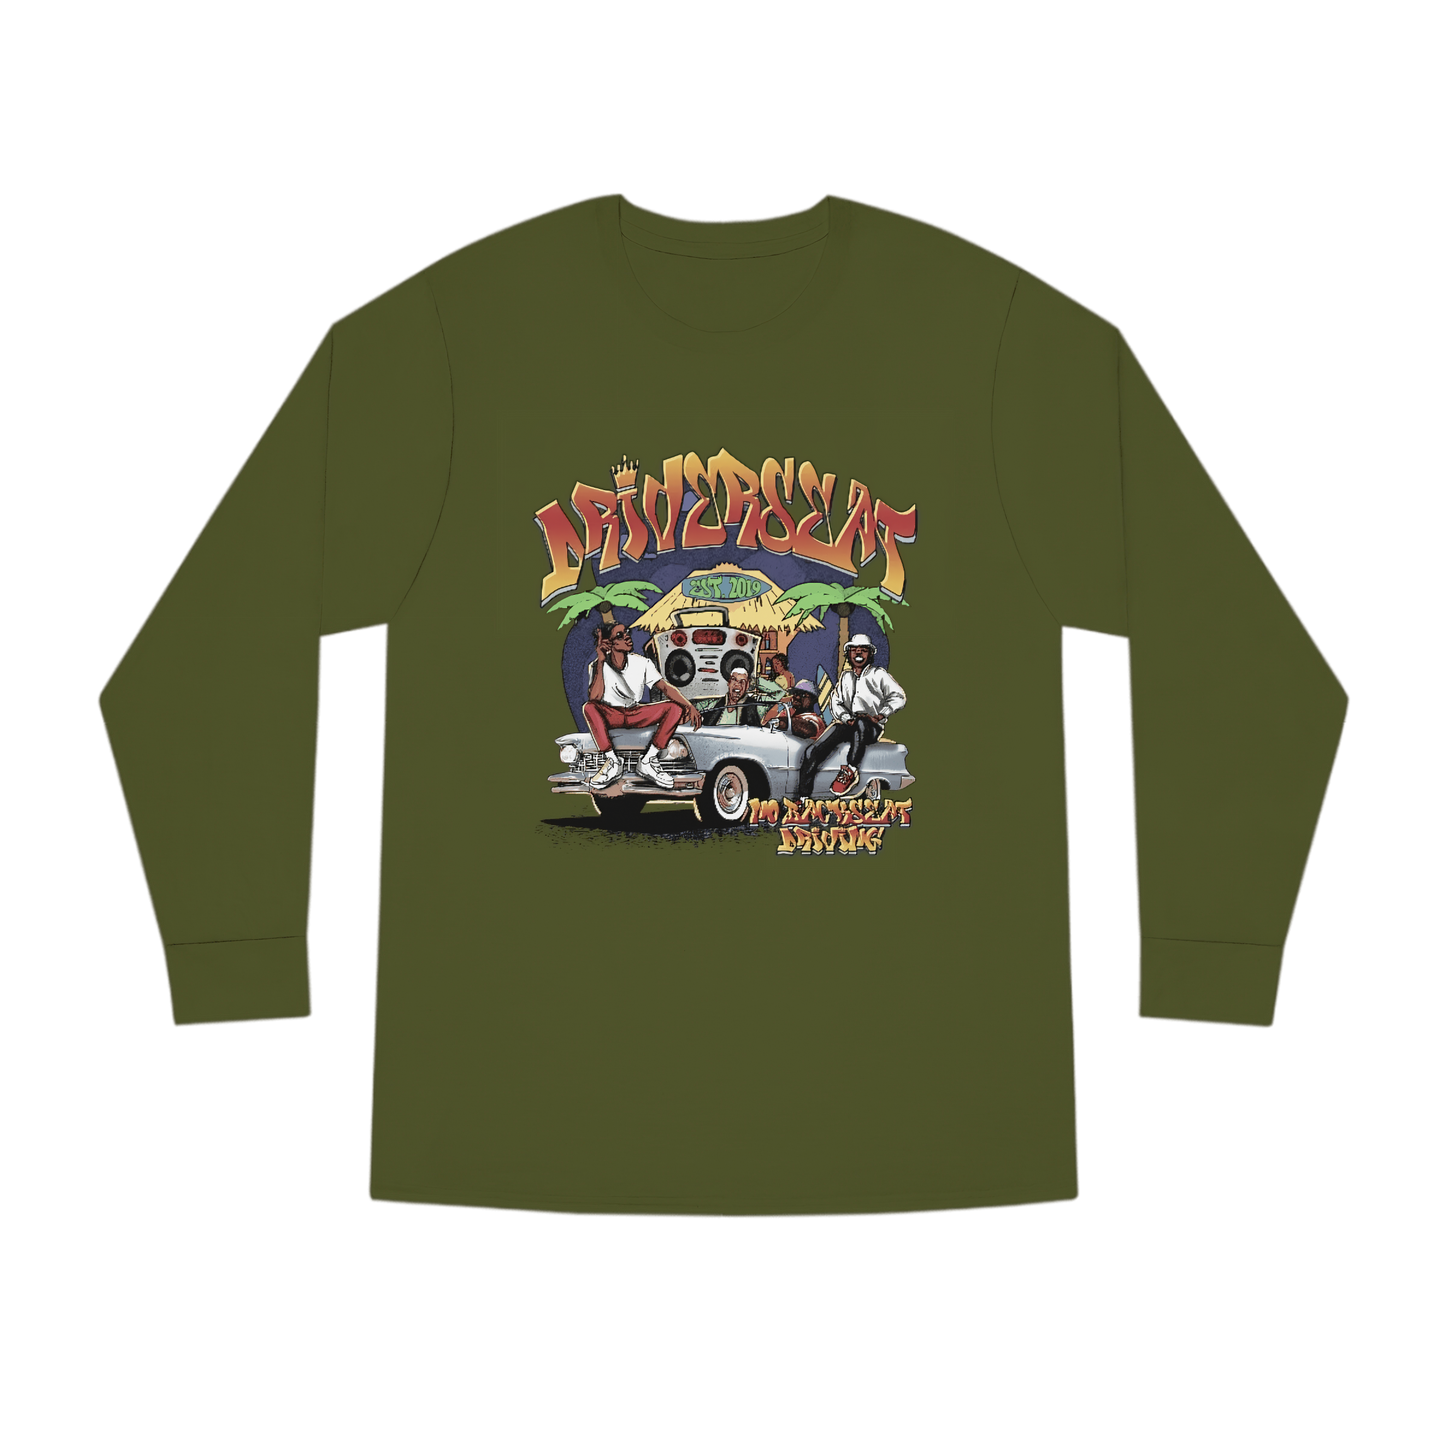 Vibes Long Sleeve - Army Green